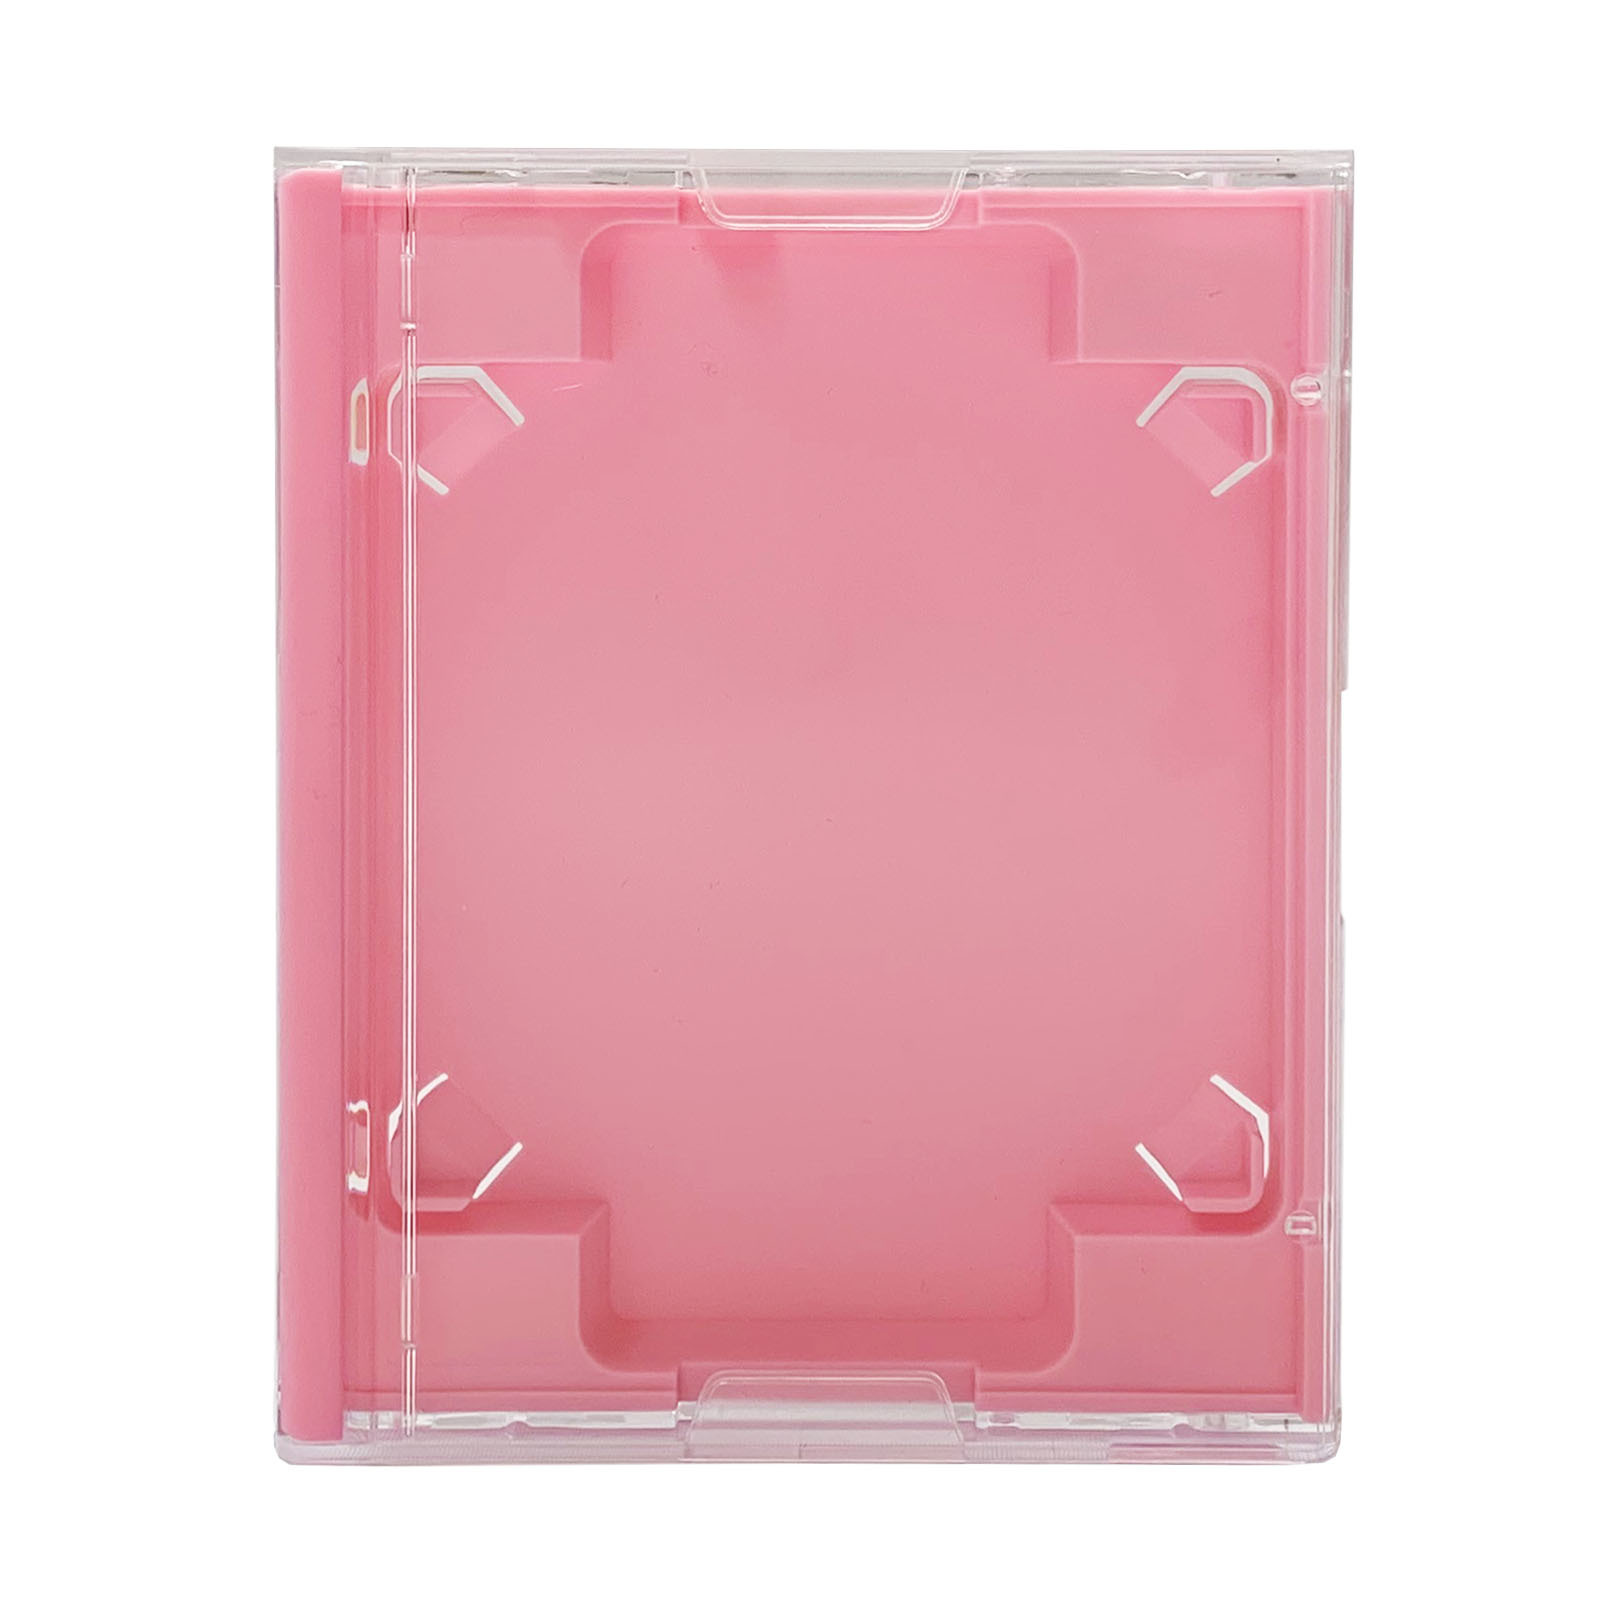 Full size MiniDisc case with a light pink inner tray - Retro Style Media